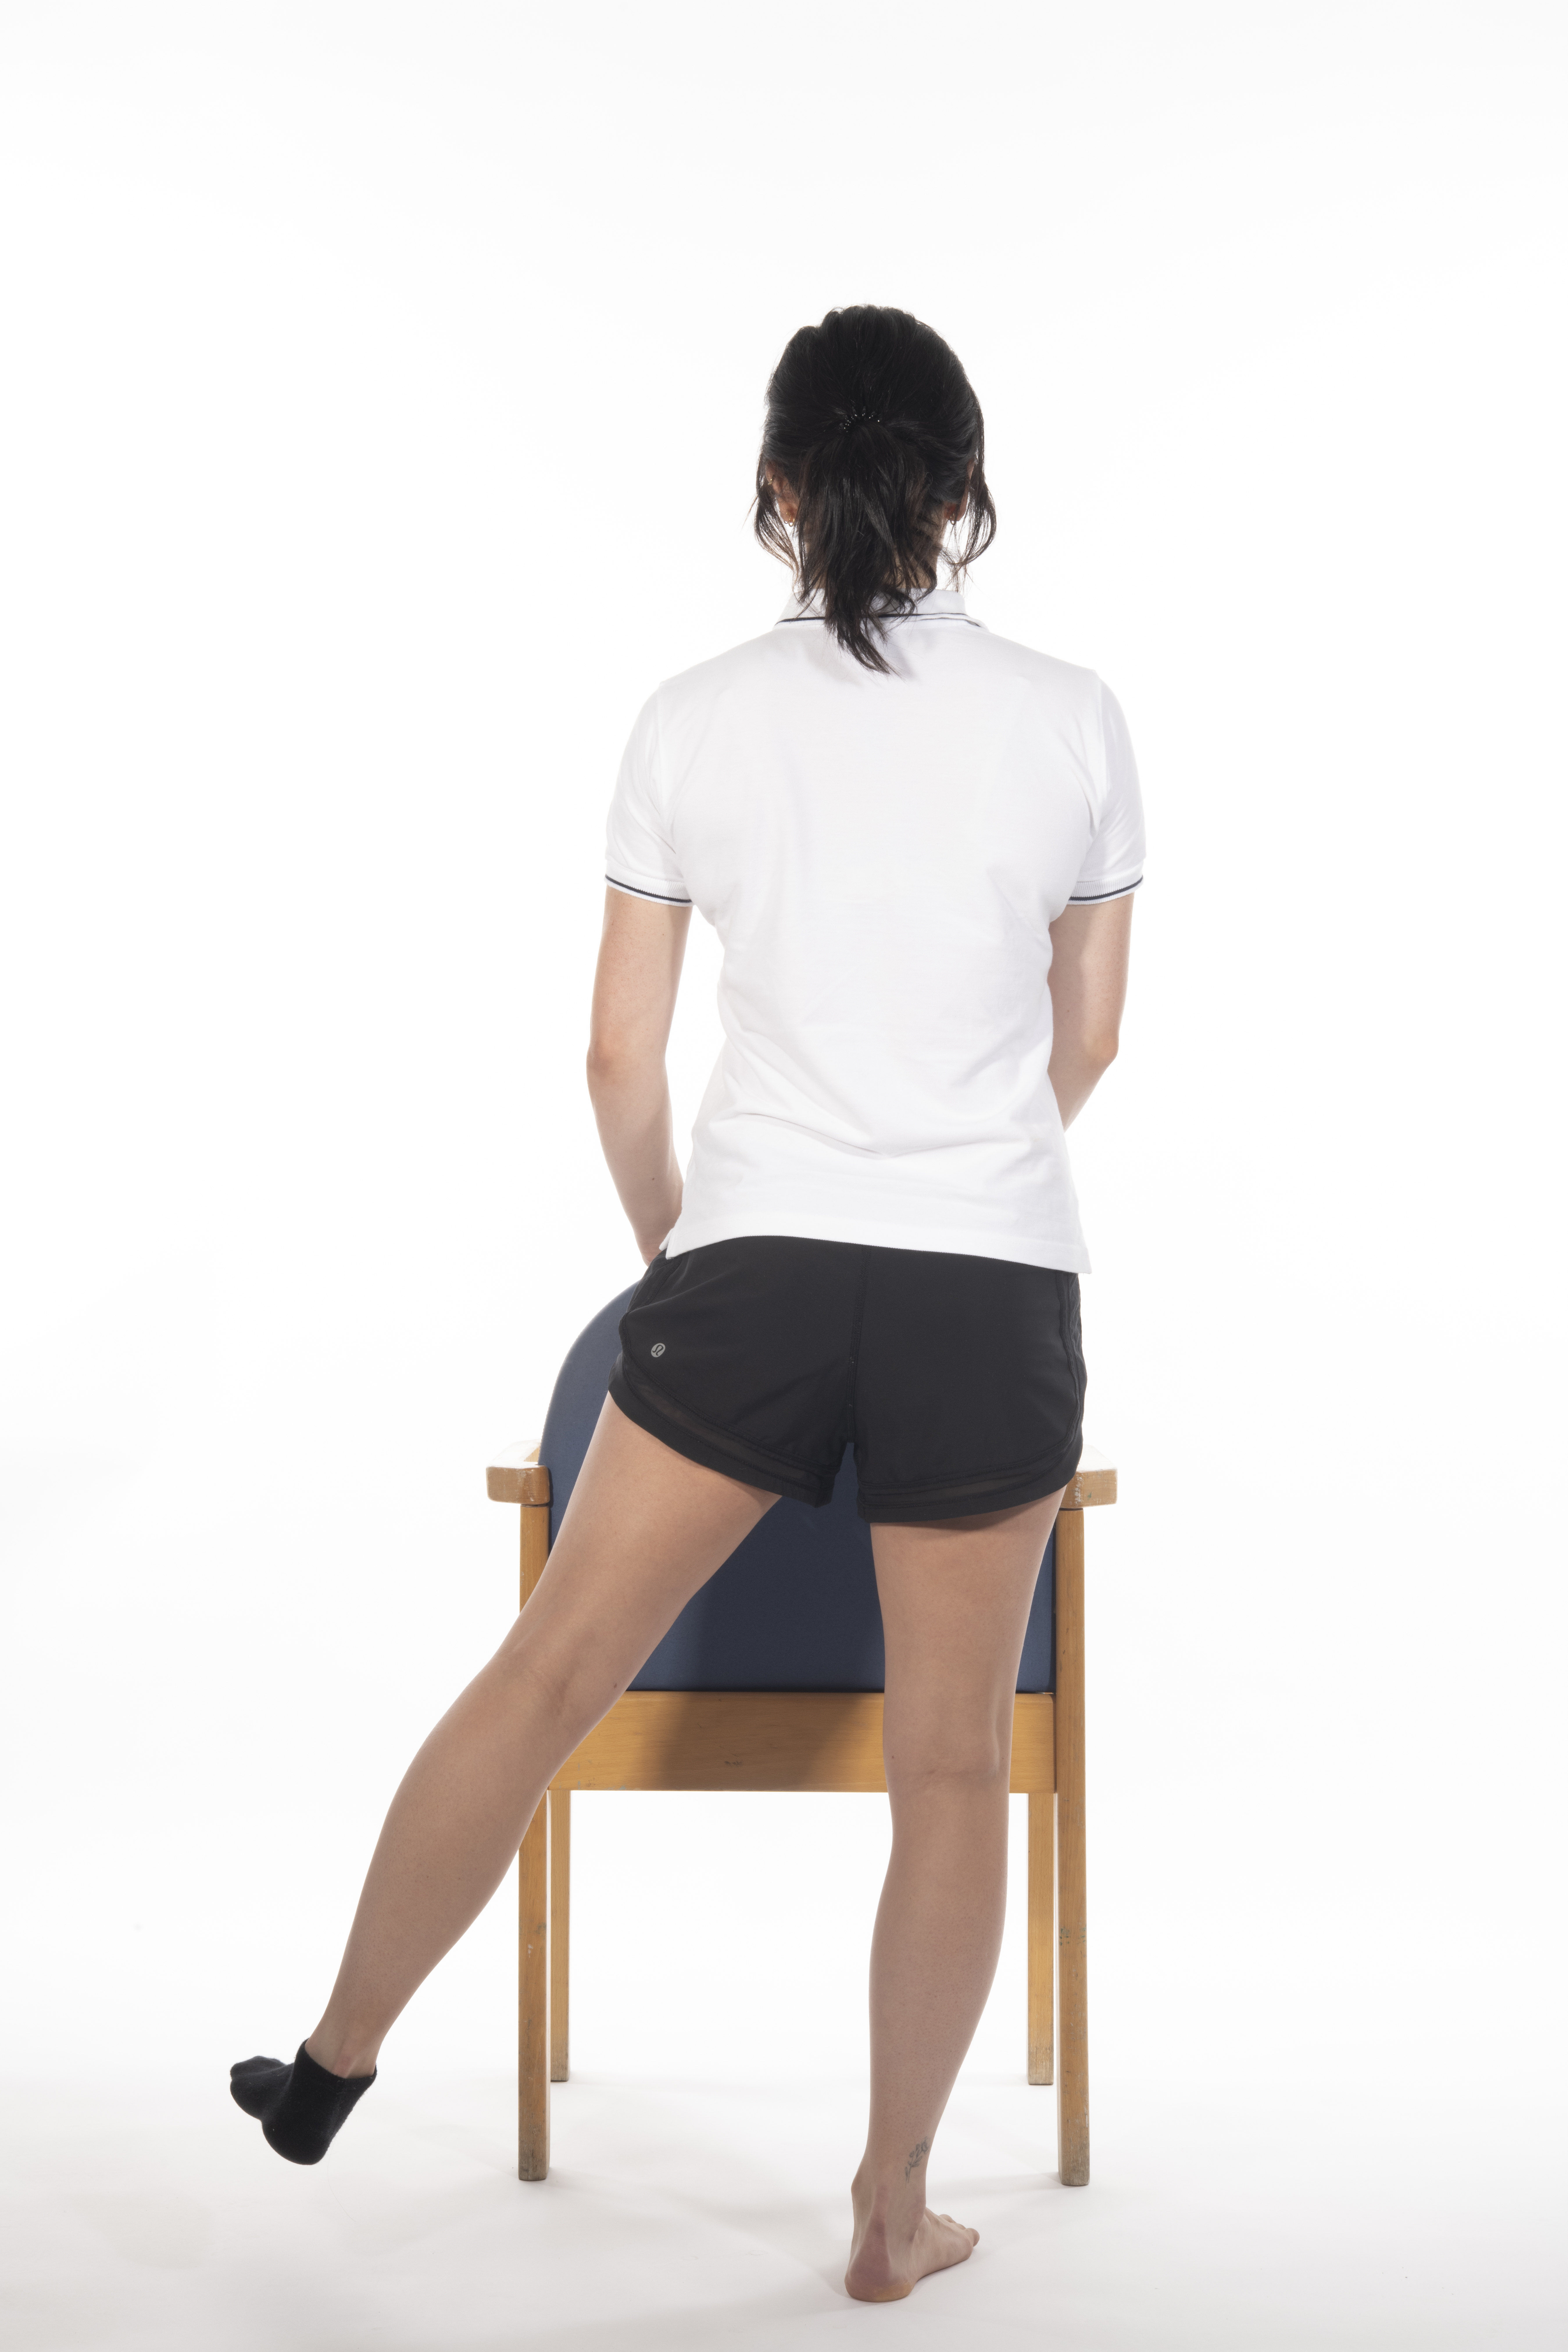 Hip abduction in standing exercise; put your weight on your opposite leg and lift your operated leg sideways, keeping your knee straight and toes forward